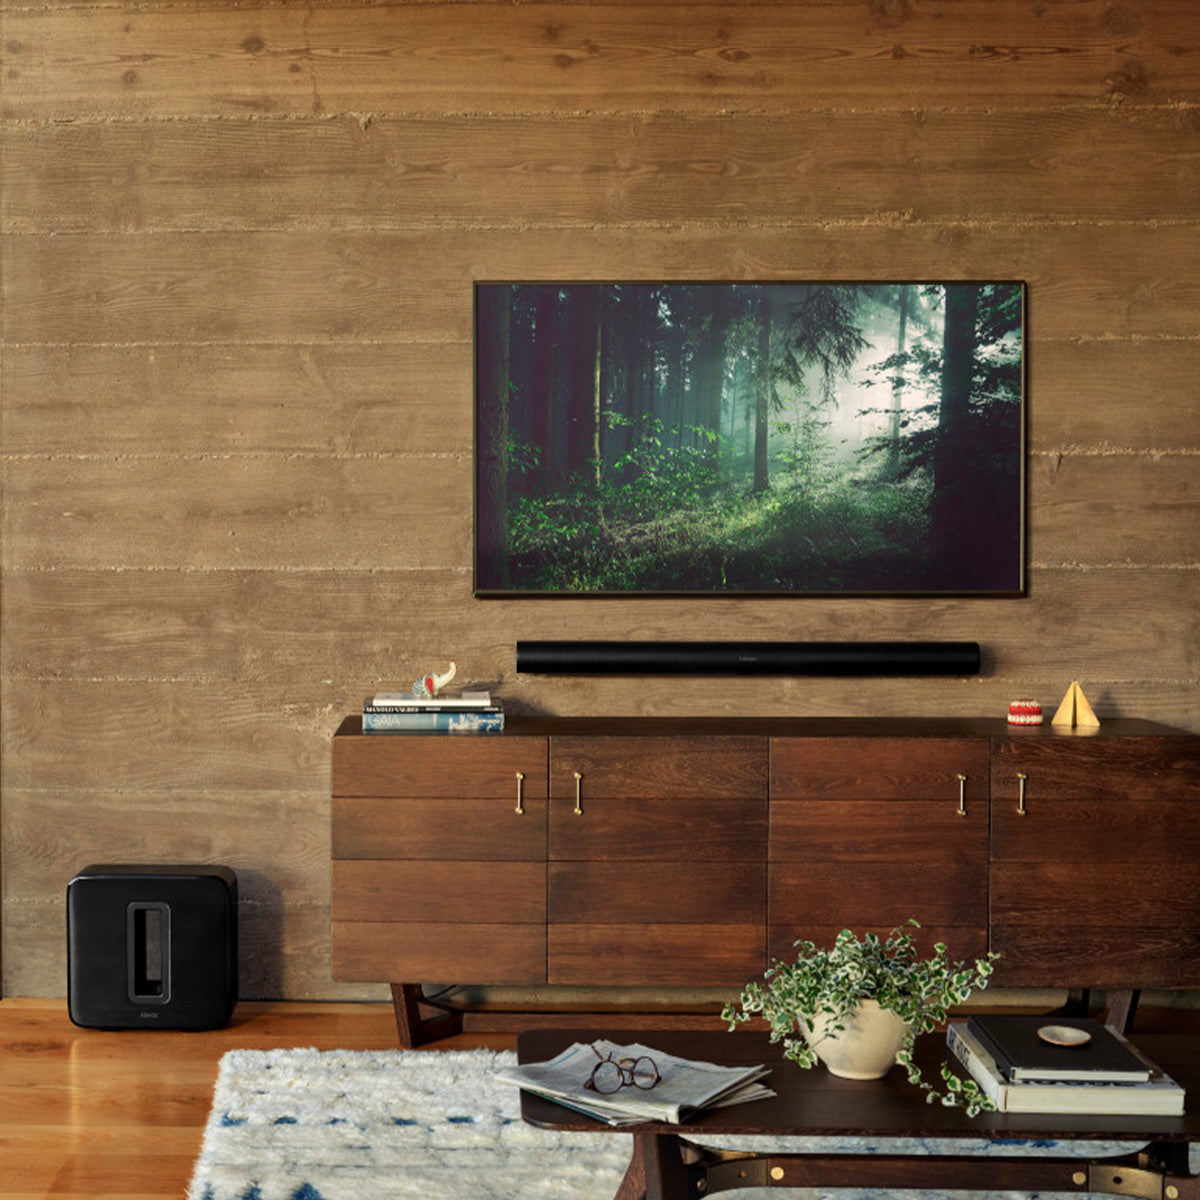 Sonos Arc Wireless Sound Bar with Dolby Atmos, Apple AirPlay 2, and  Built-in Voice Assistant (Black)